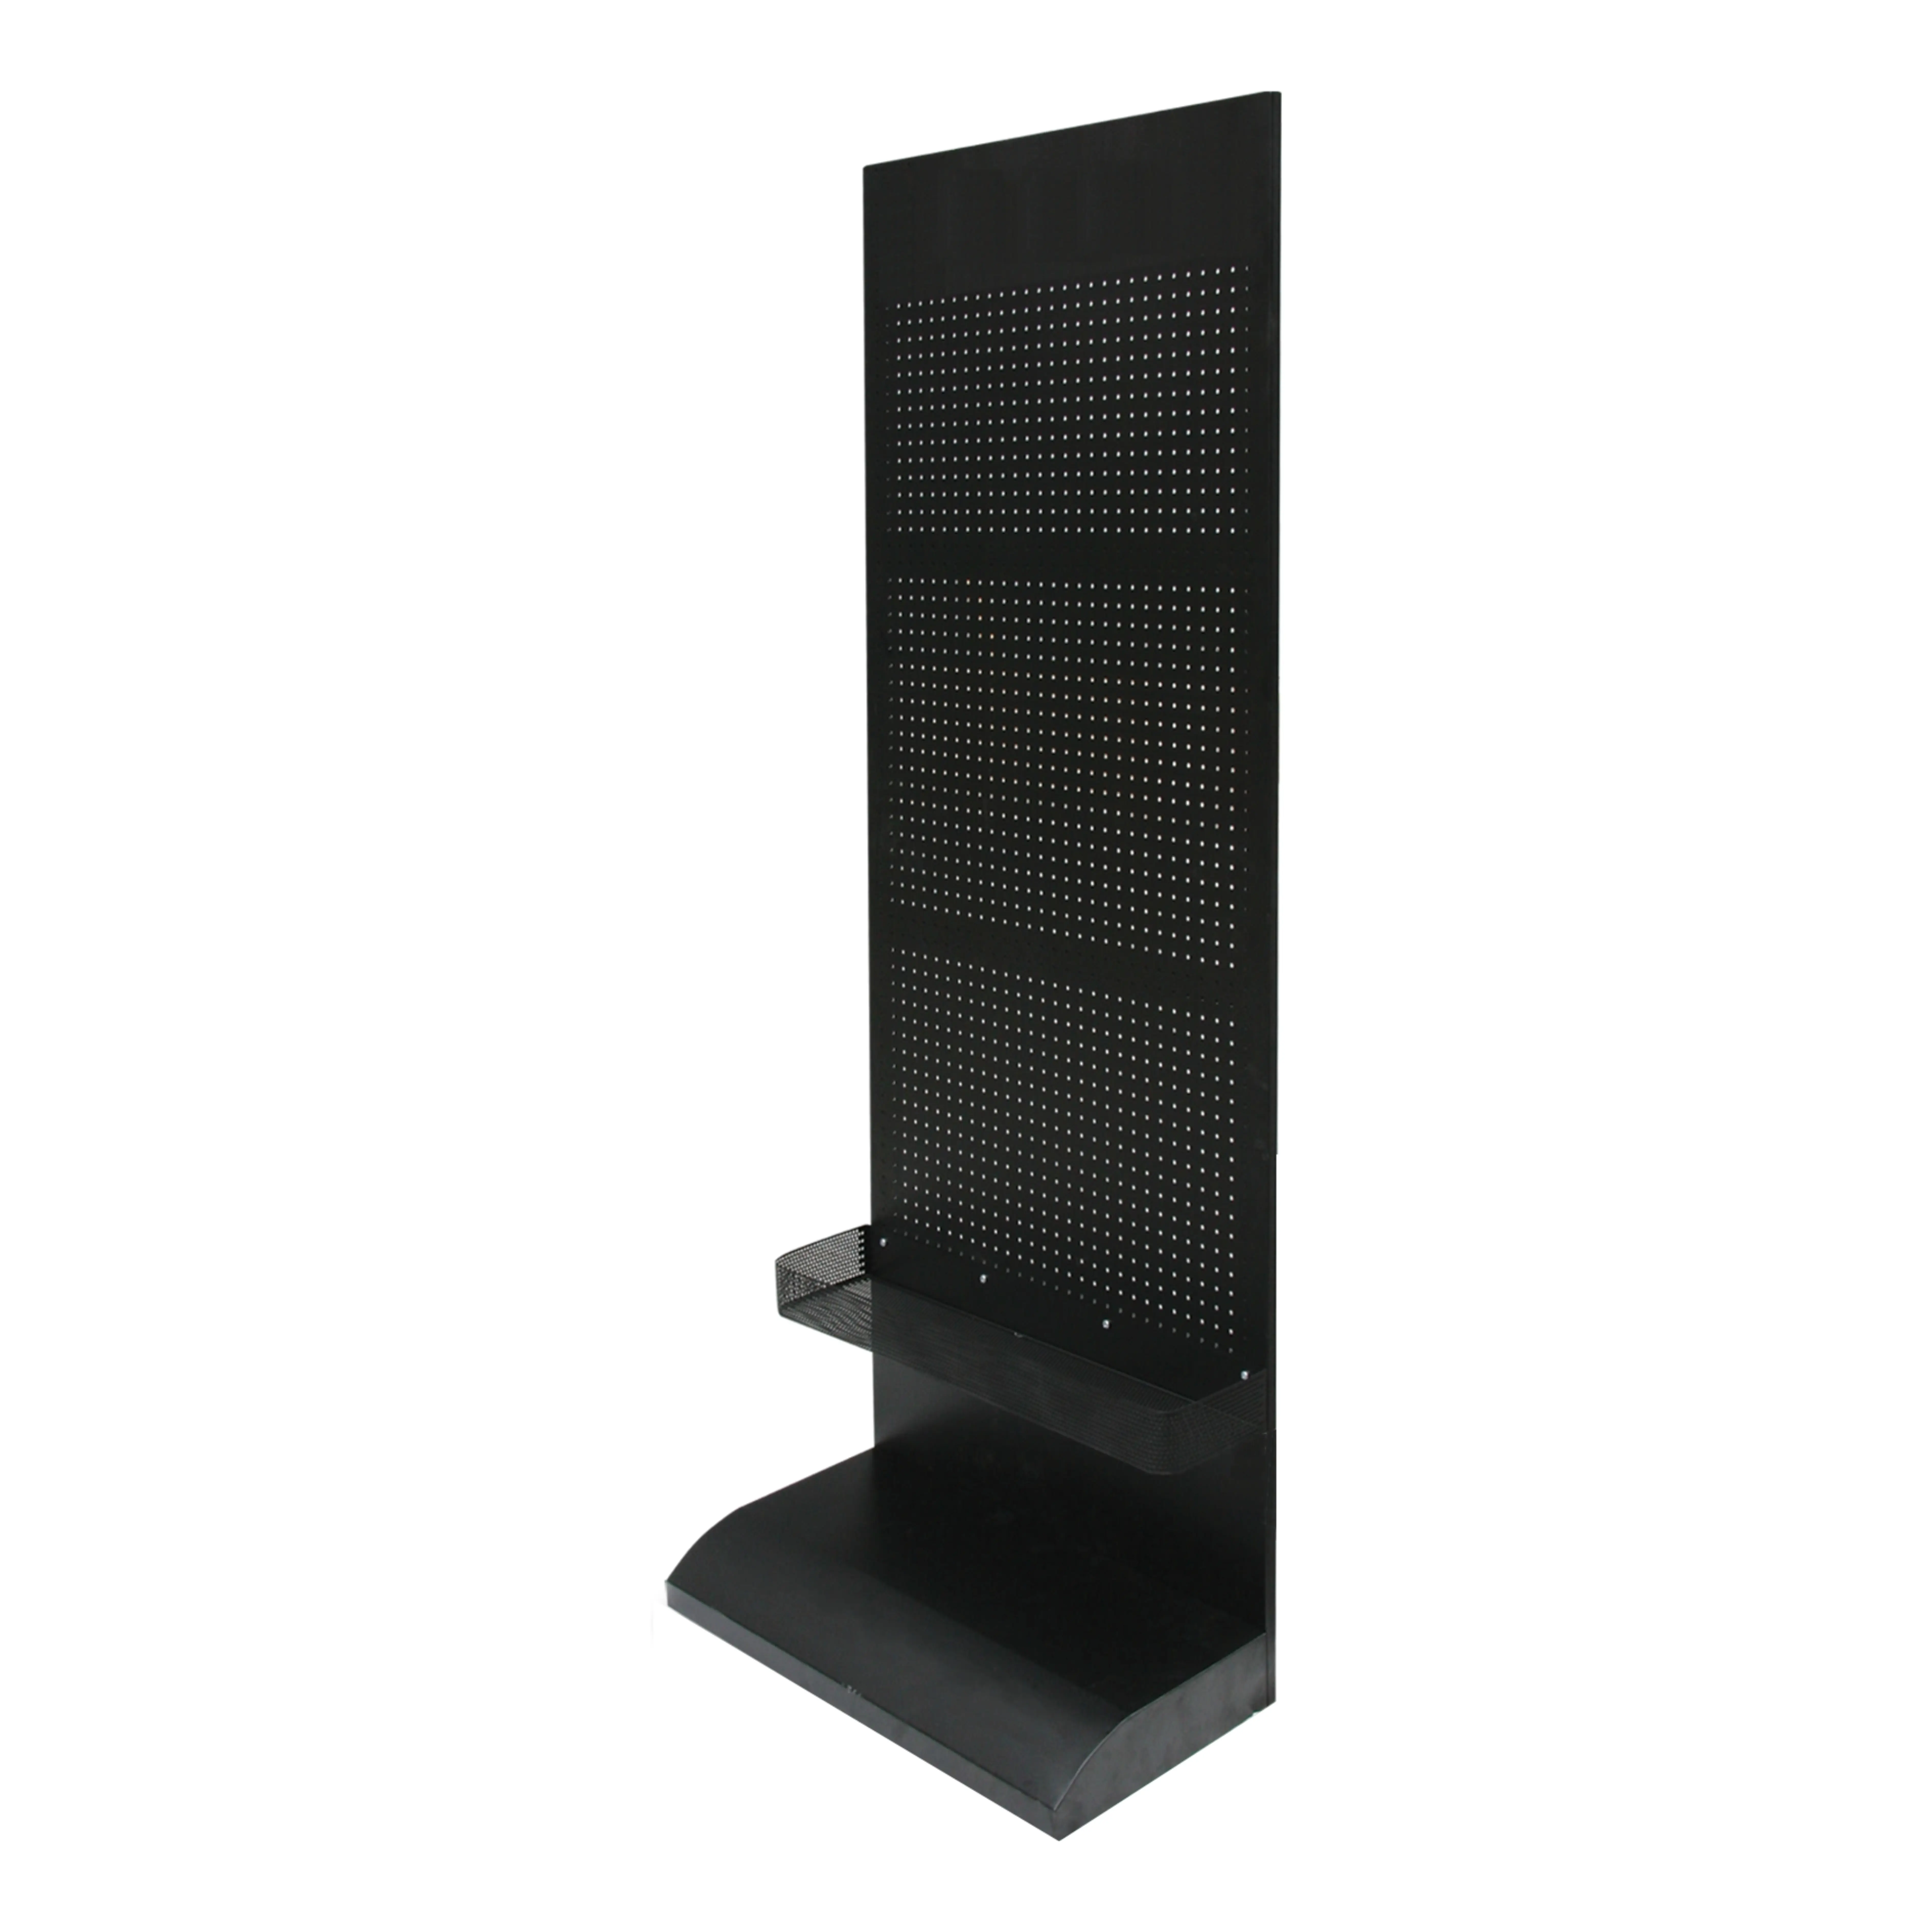 Stand Display DFS101 Office Computer Accessories Advertising Equipment Floor Stand Display Show Stand